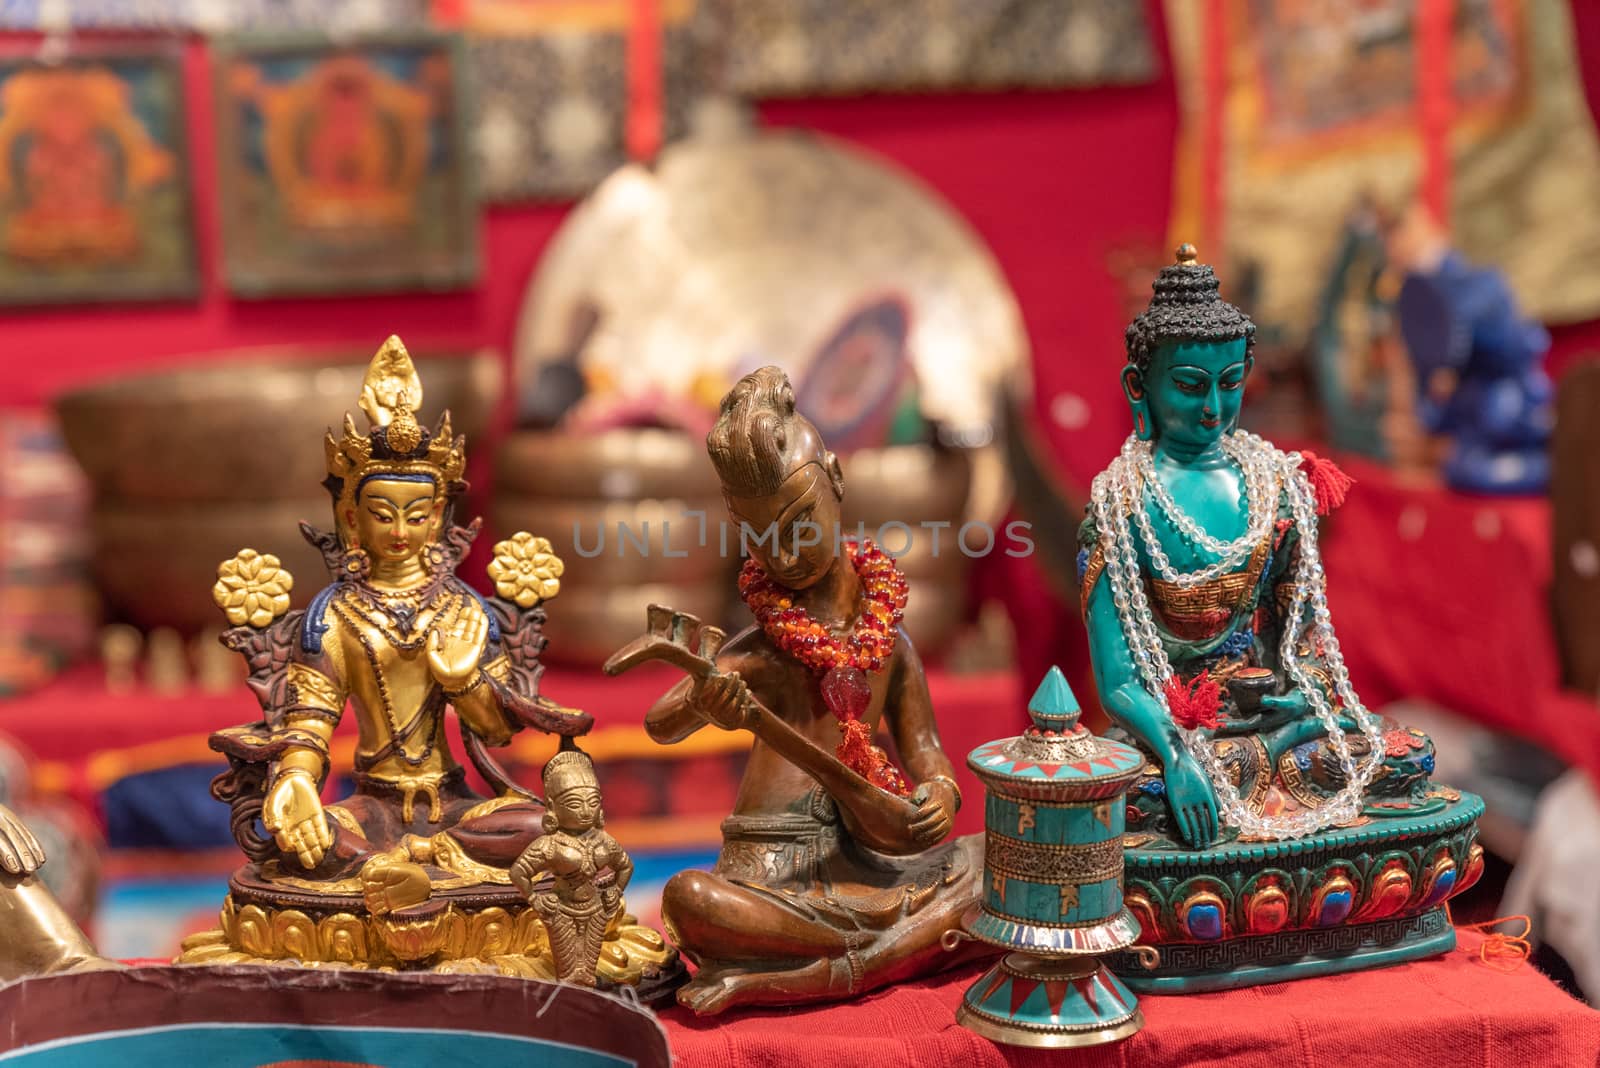 Three different statuettes depicting the Buddha in an ethnic market, horizontal image